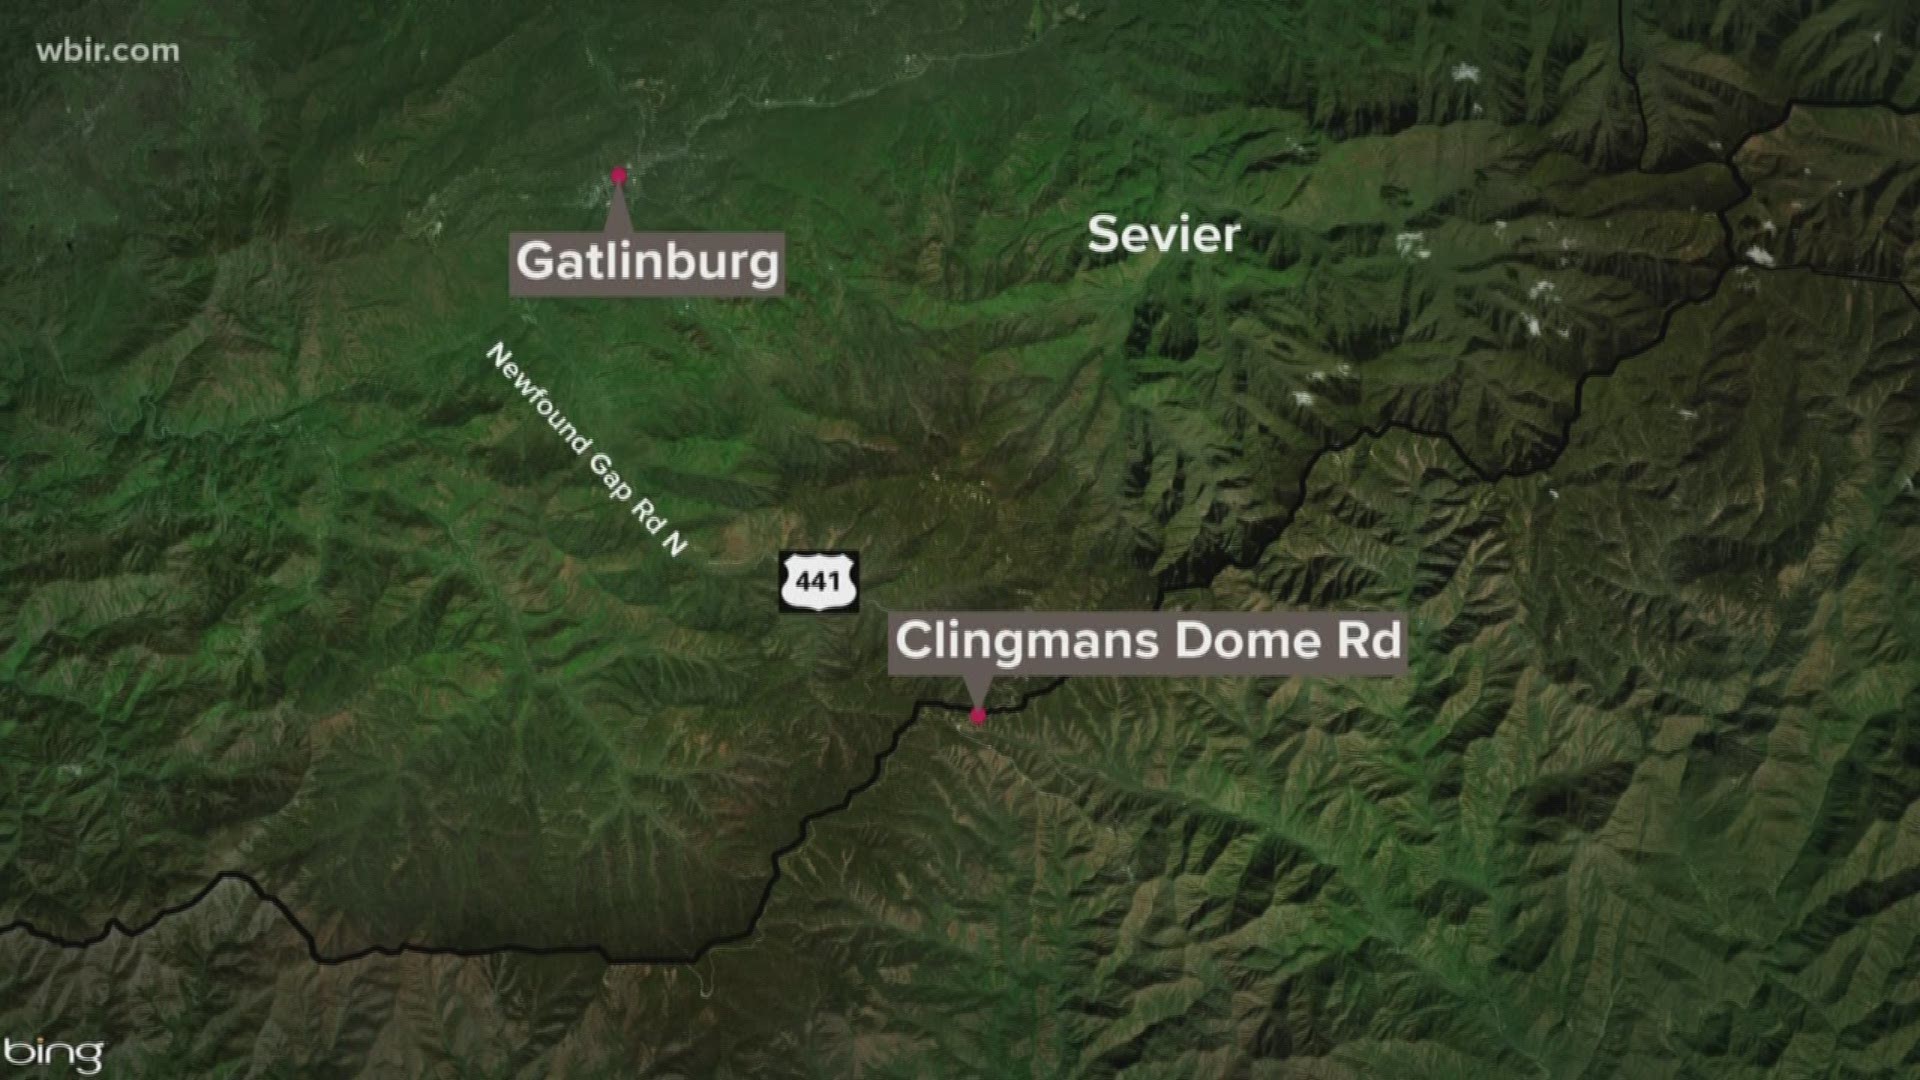 Park officials say 37-year-old Timothy McCauley, a Missouri man, died in a crash Monday afternoon as he was driving on Clingmans Dome Road. A passenger, 38-year-old Angela Walker, was flown by Lifestar to UT Medical Center.